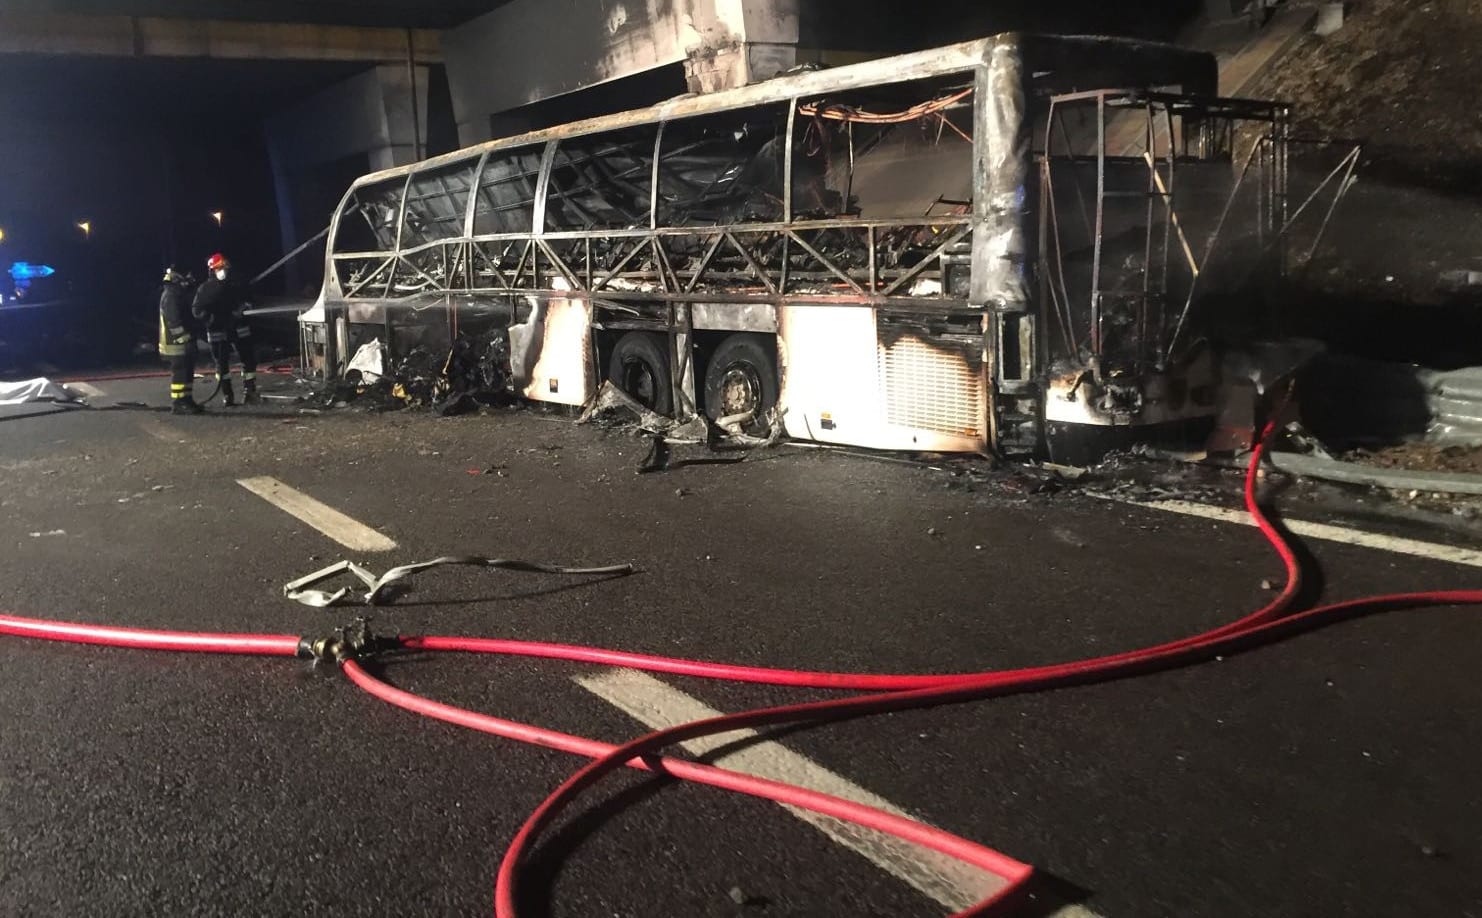 The bus that was carrying Hungarian students home to Budapest from a school trip from France caught fire after an accident on 'Verona Est' highway.